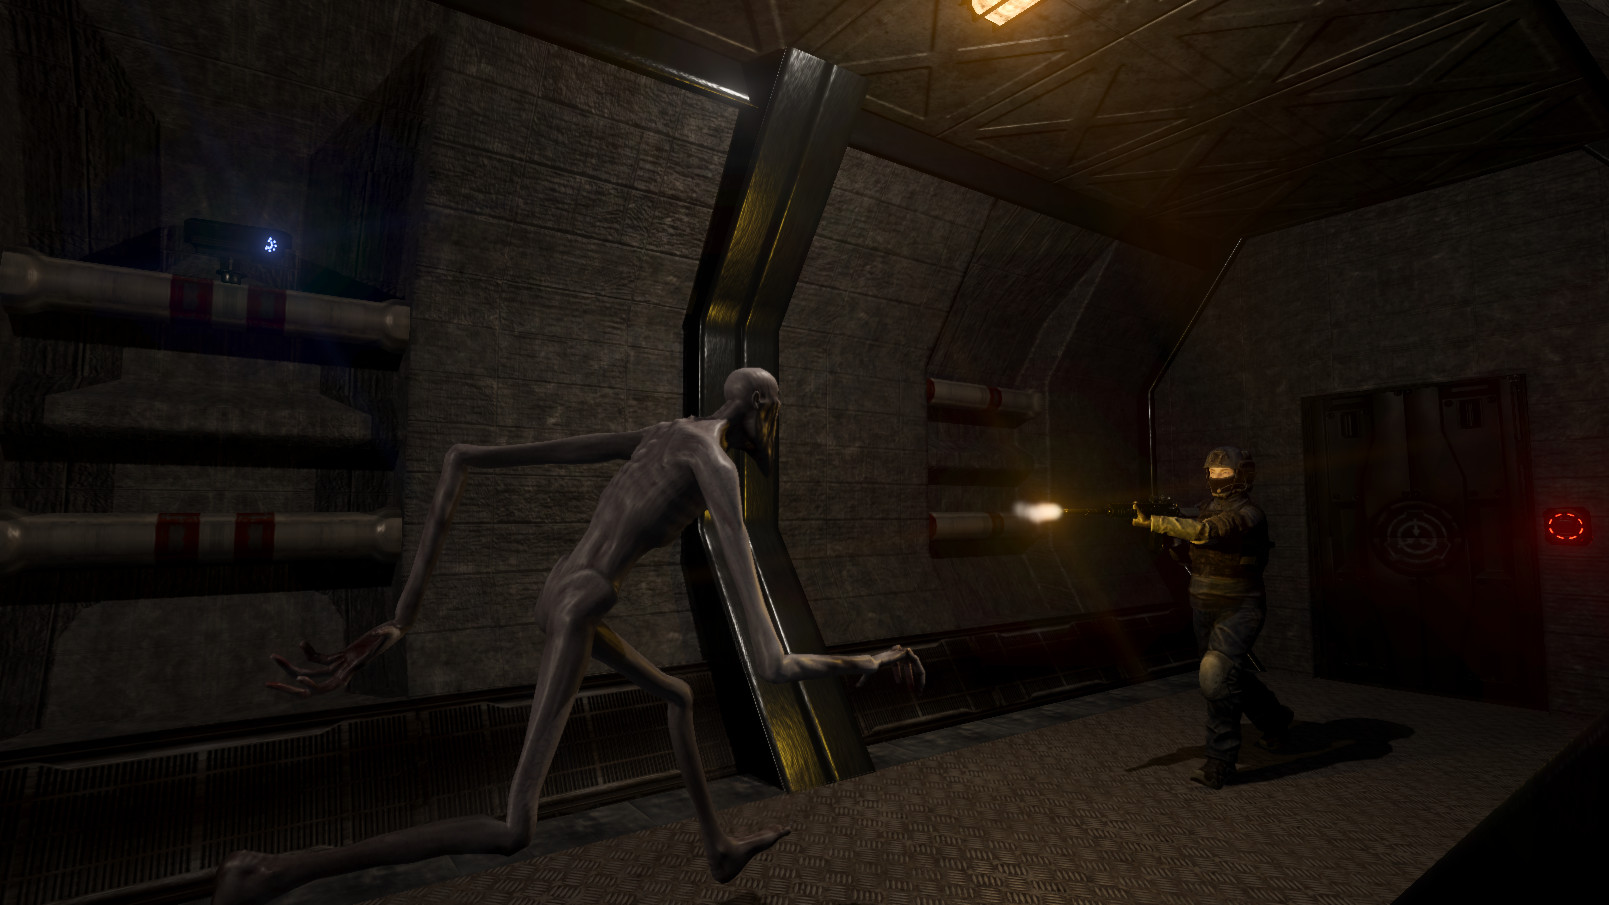 scp multiplayer download free